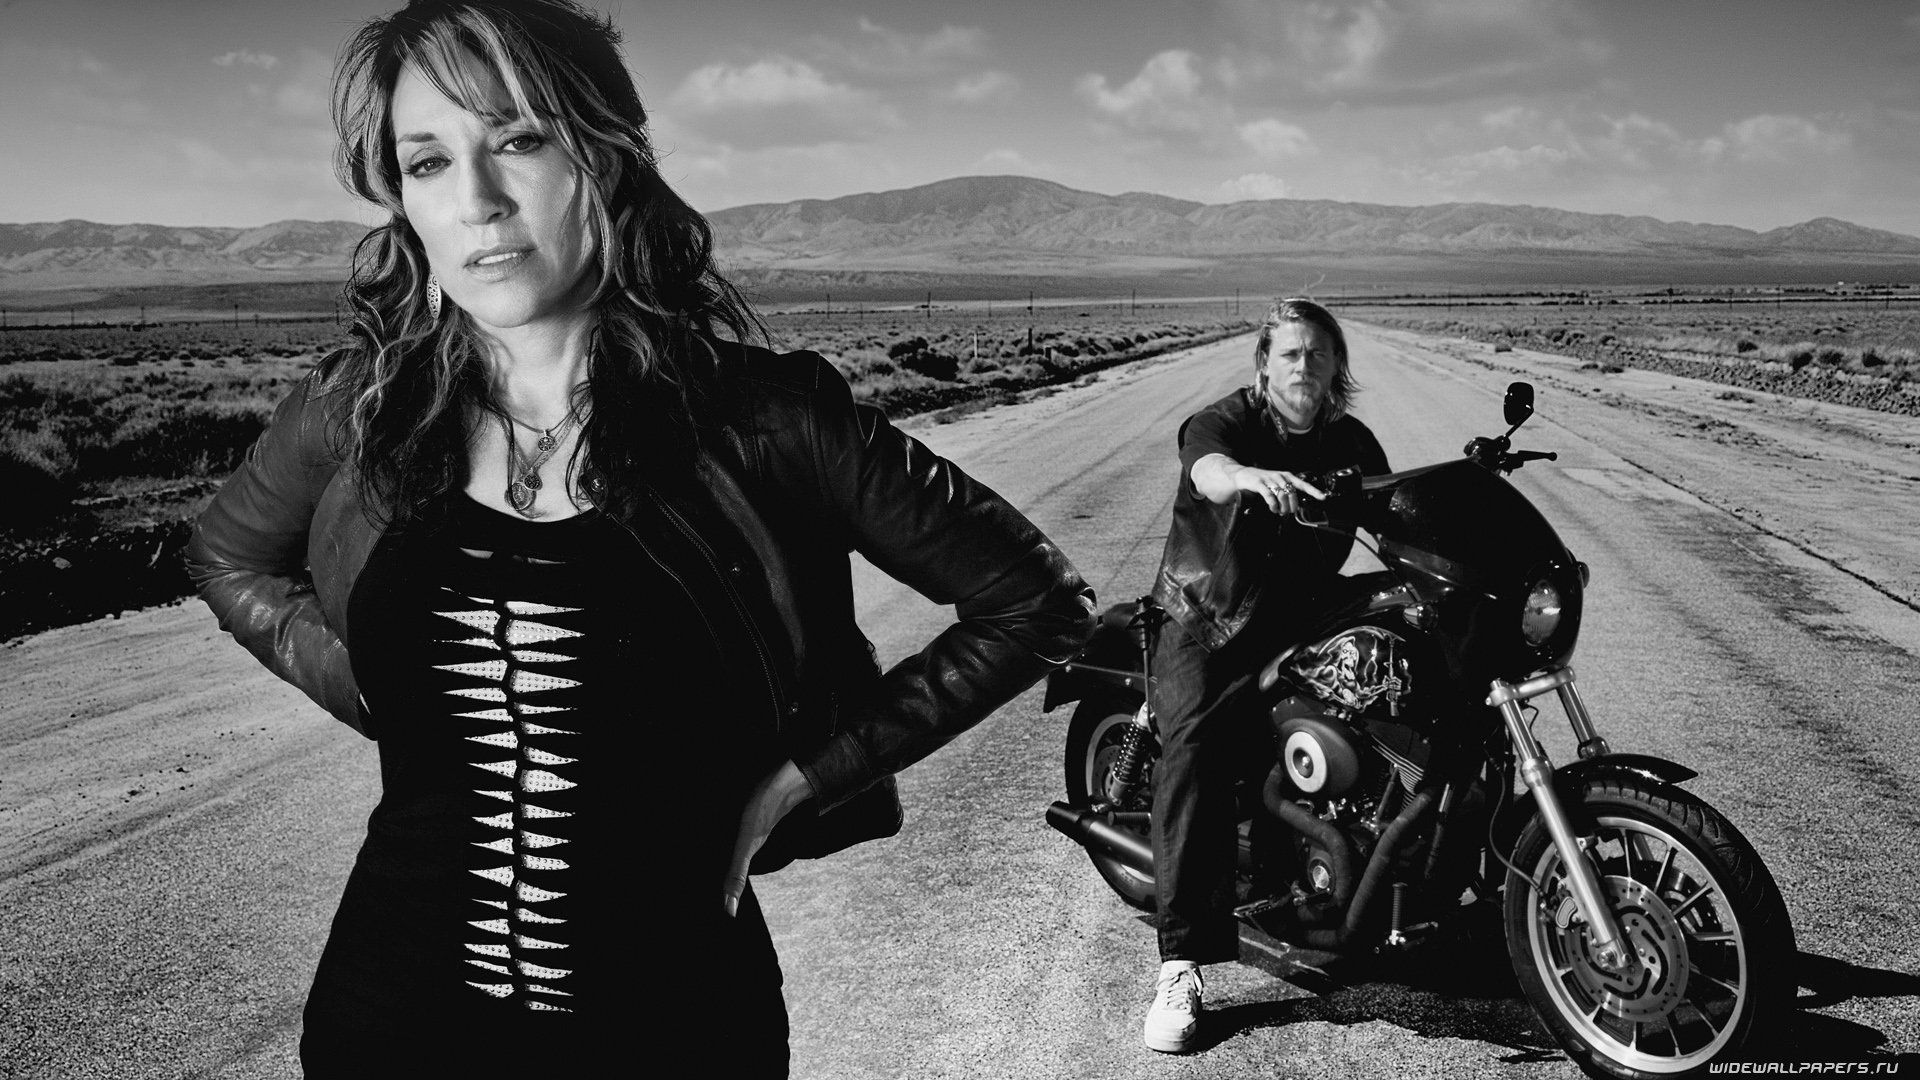 Gemma And Jax - Sons Of Anarchy Wallpaper » WallDevil - Best free ...